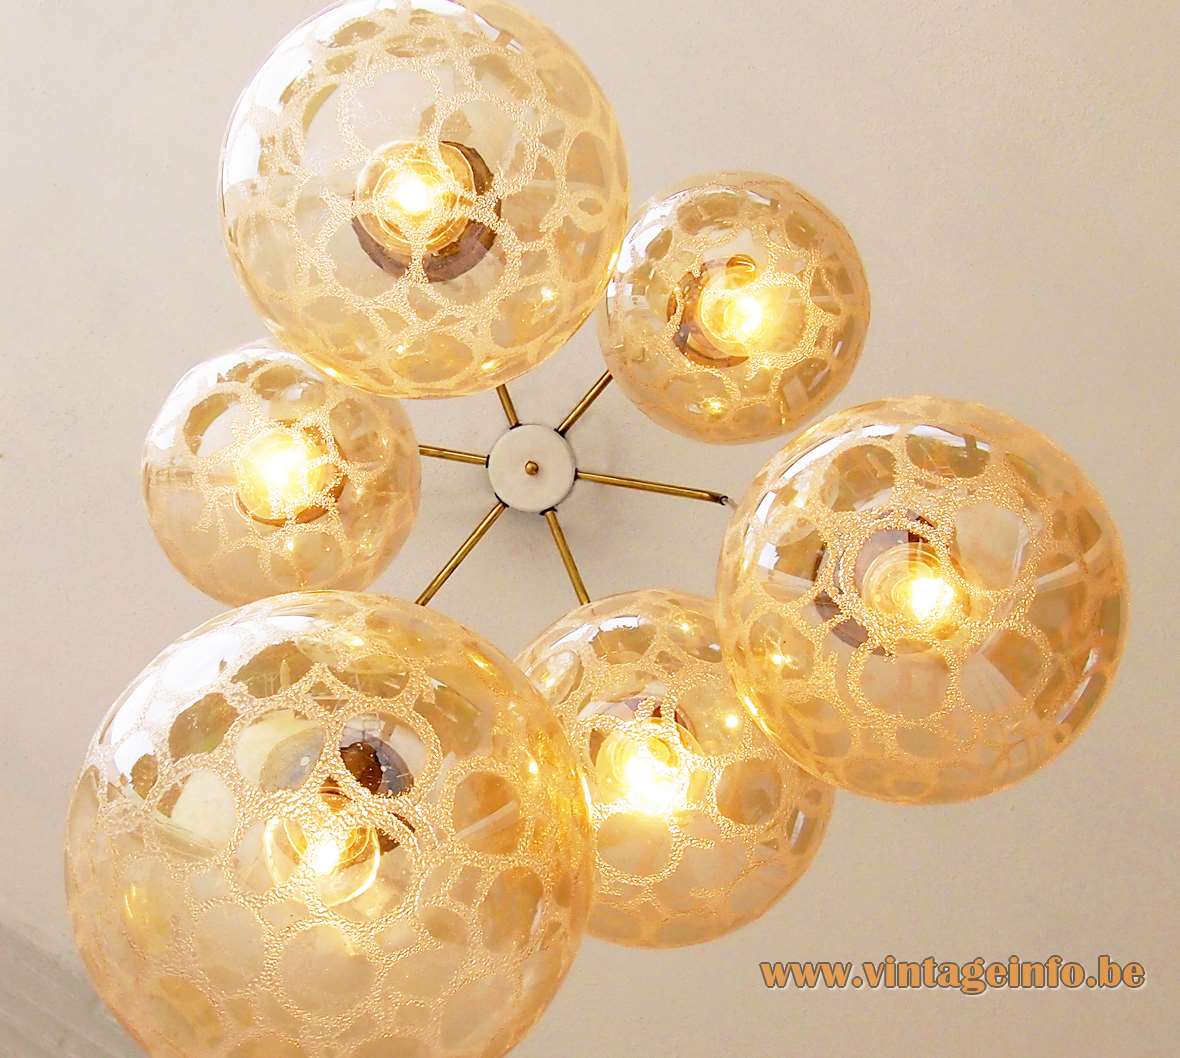 DORIA croco-ice cascade chandelier 6 amber glass globes pendant lamps brass spider mount 1970s Germany